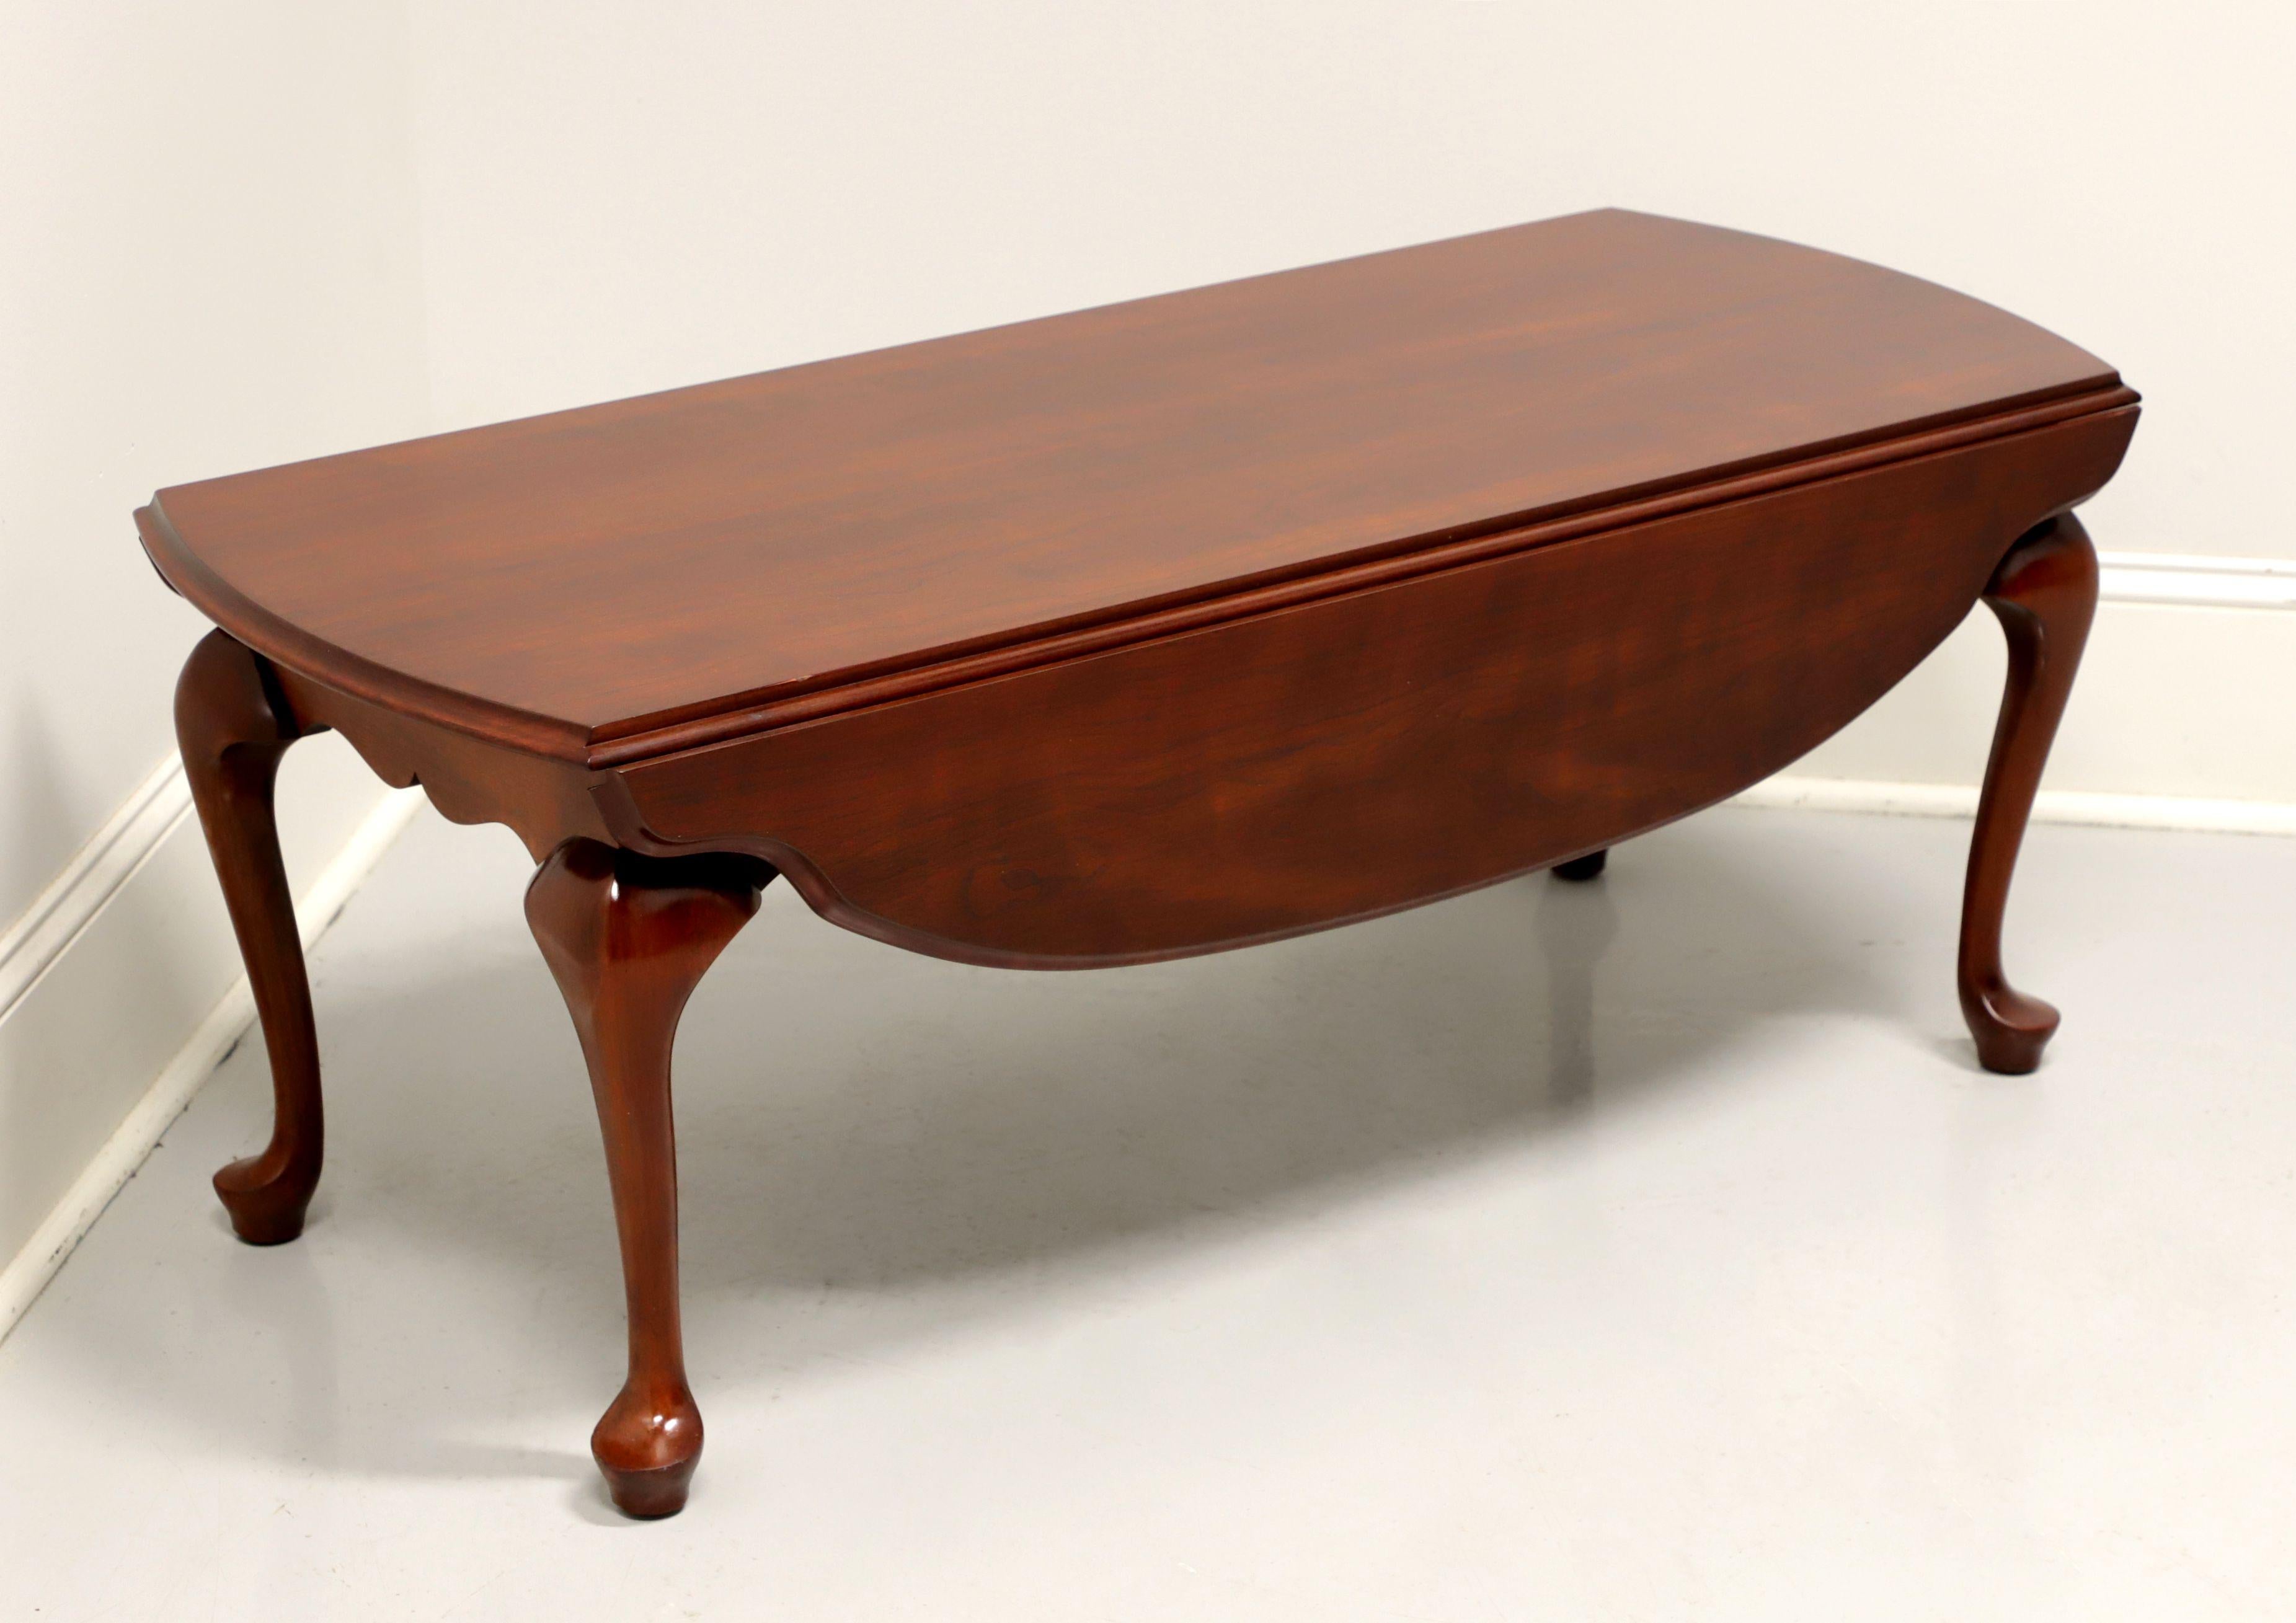 A Queen Anne style drop-leaf coffee table by Henkel Harris, of Winchester, Virginia, USA. Solid cherry, scalloped edge to drop leaves, carved apron, cabriole legs, pad feet. Made circa 1995.

Style #: 5234, Finish #: 24

Measures: 45 W 19.75 D